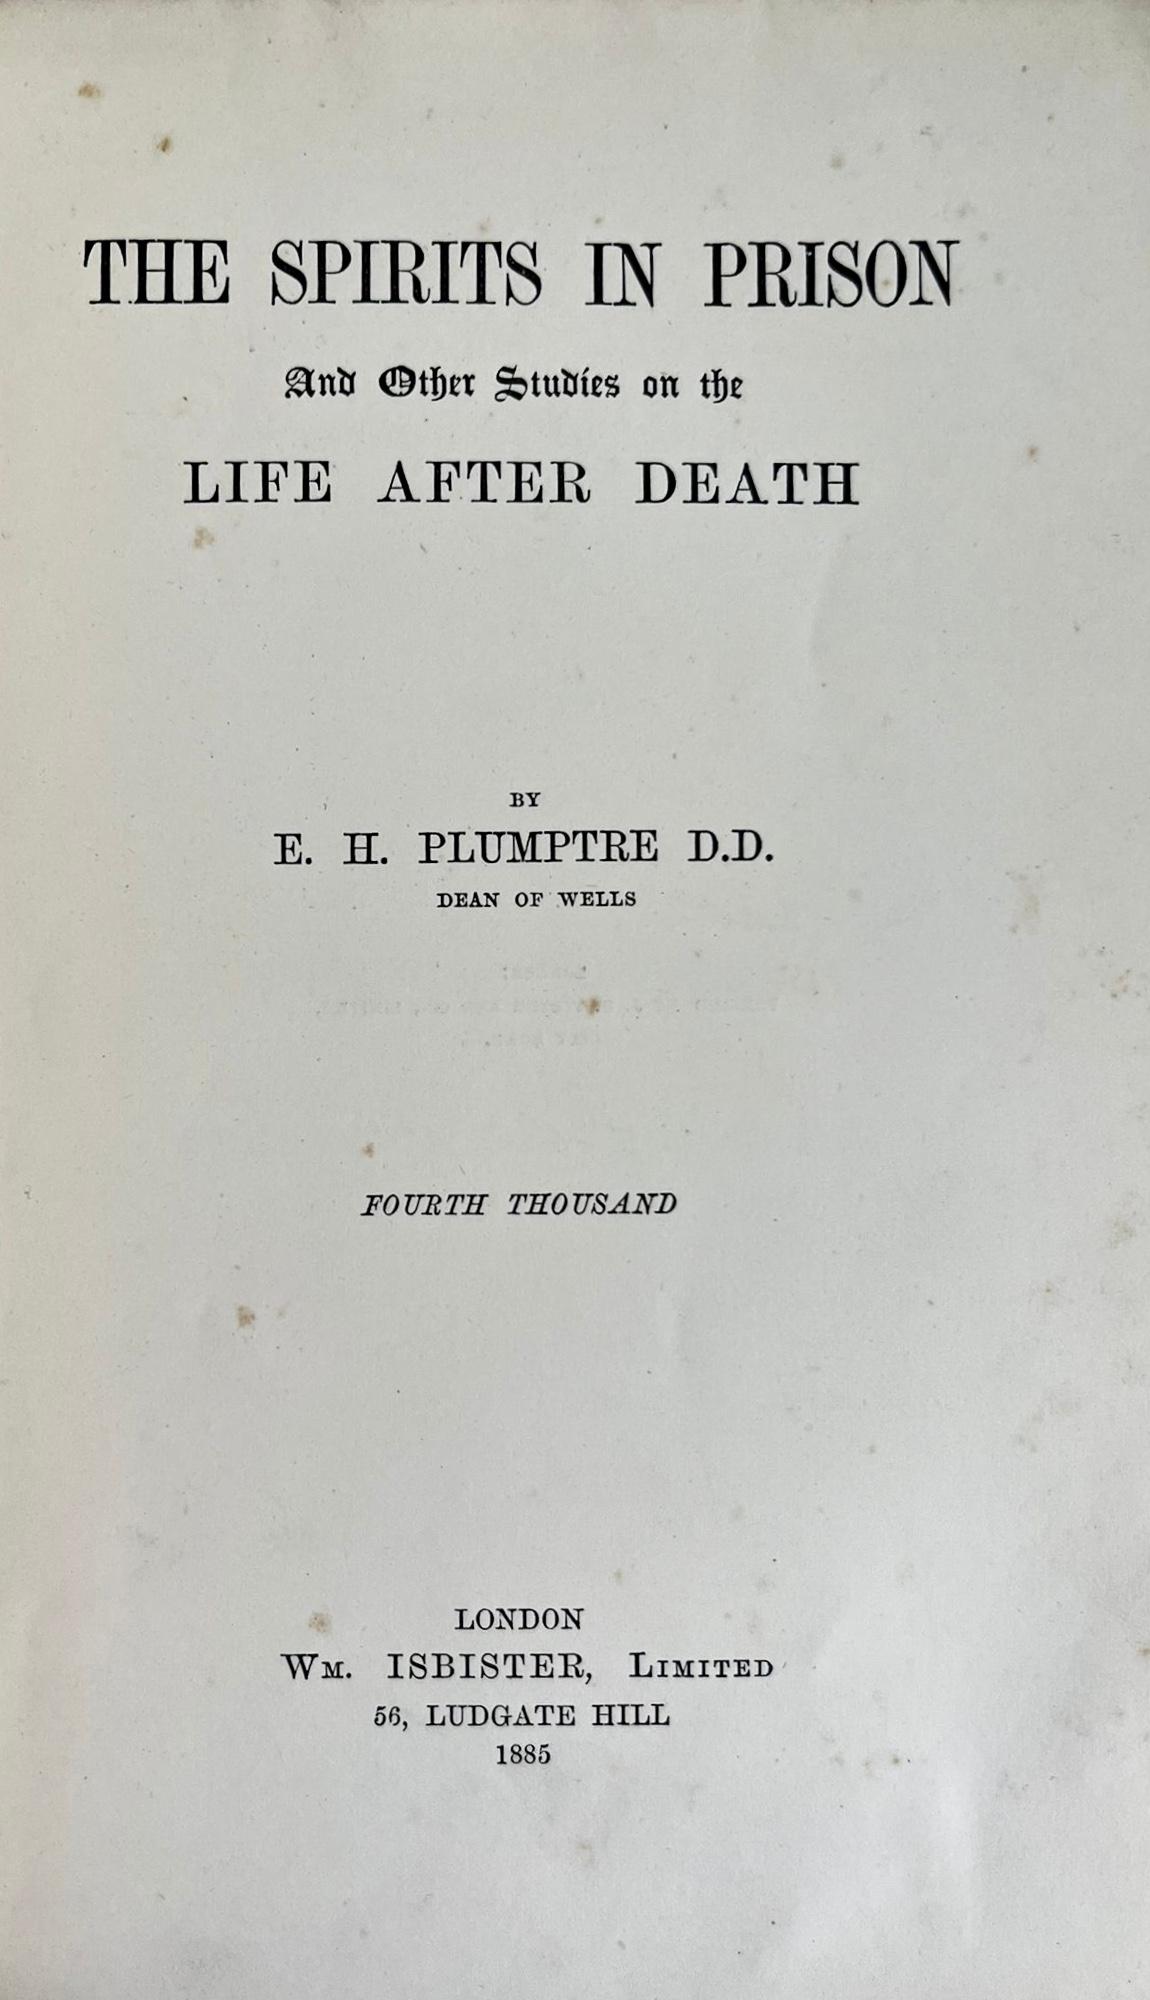 The Spirits In Prison And Other Studies of Life After Death by E. H. Plumptree